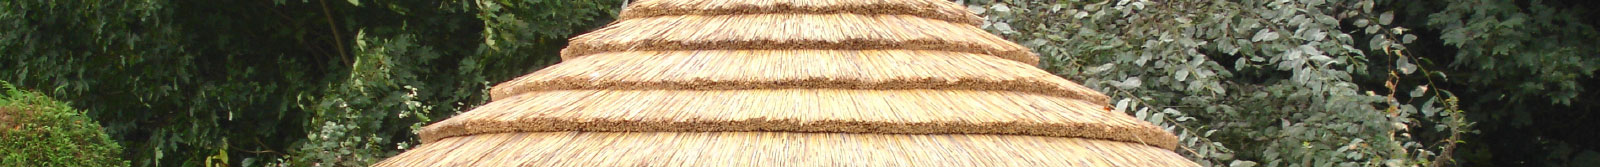 African Thatch 6 Kit 6.0 X 3.8M Oval Thatched Gazebo